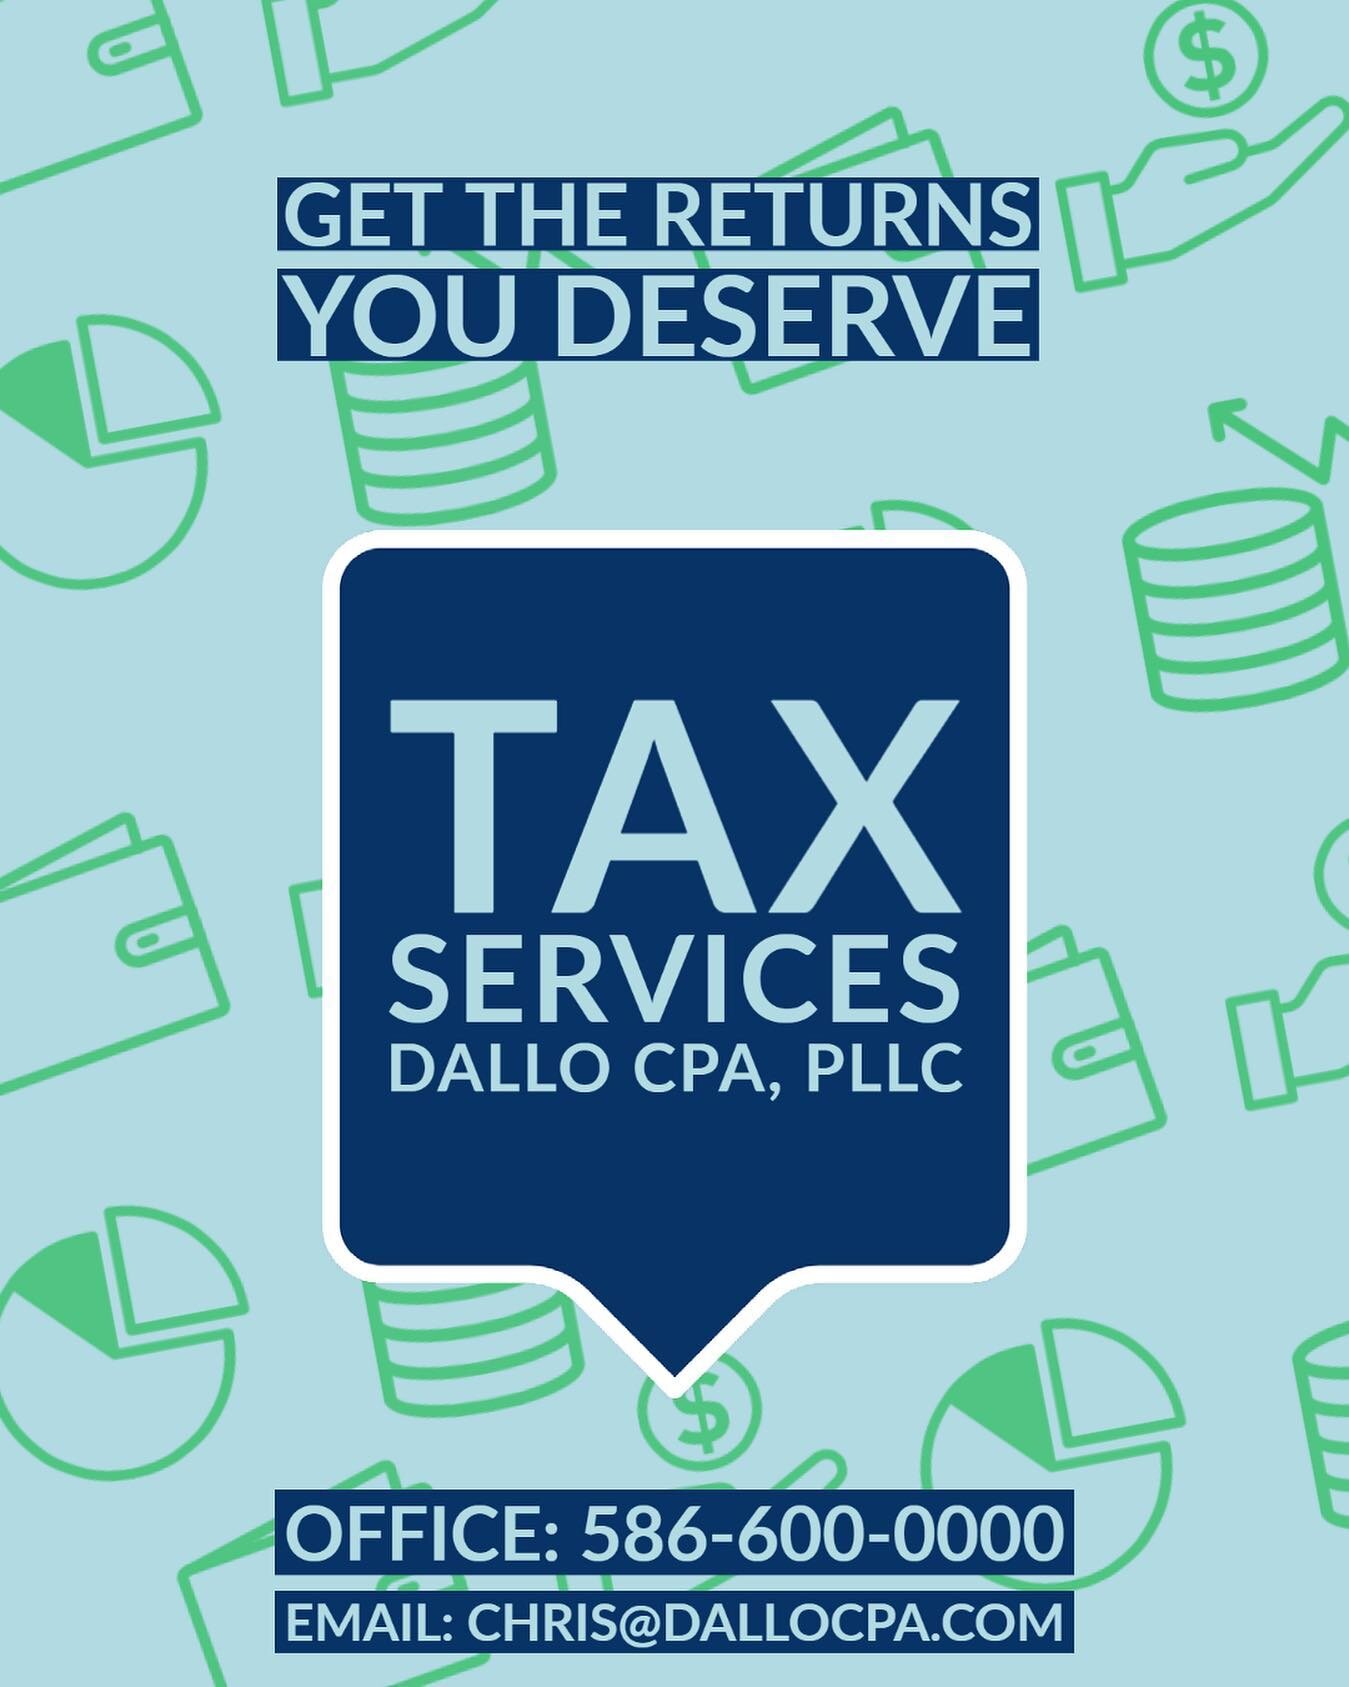 Reach out to get the returns your deserve! #tax #taxrefund #taxpreparer #dallocpa